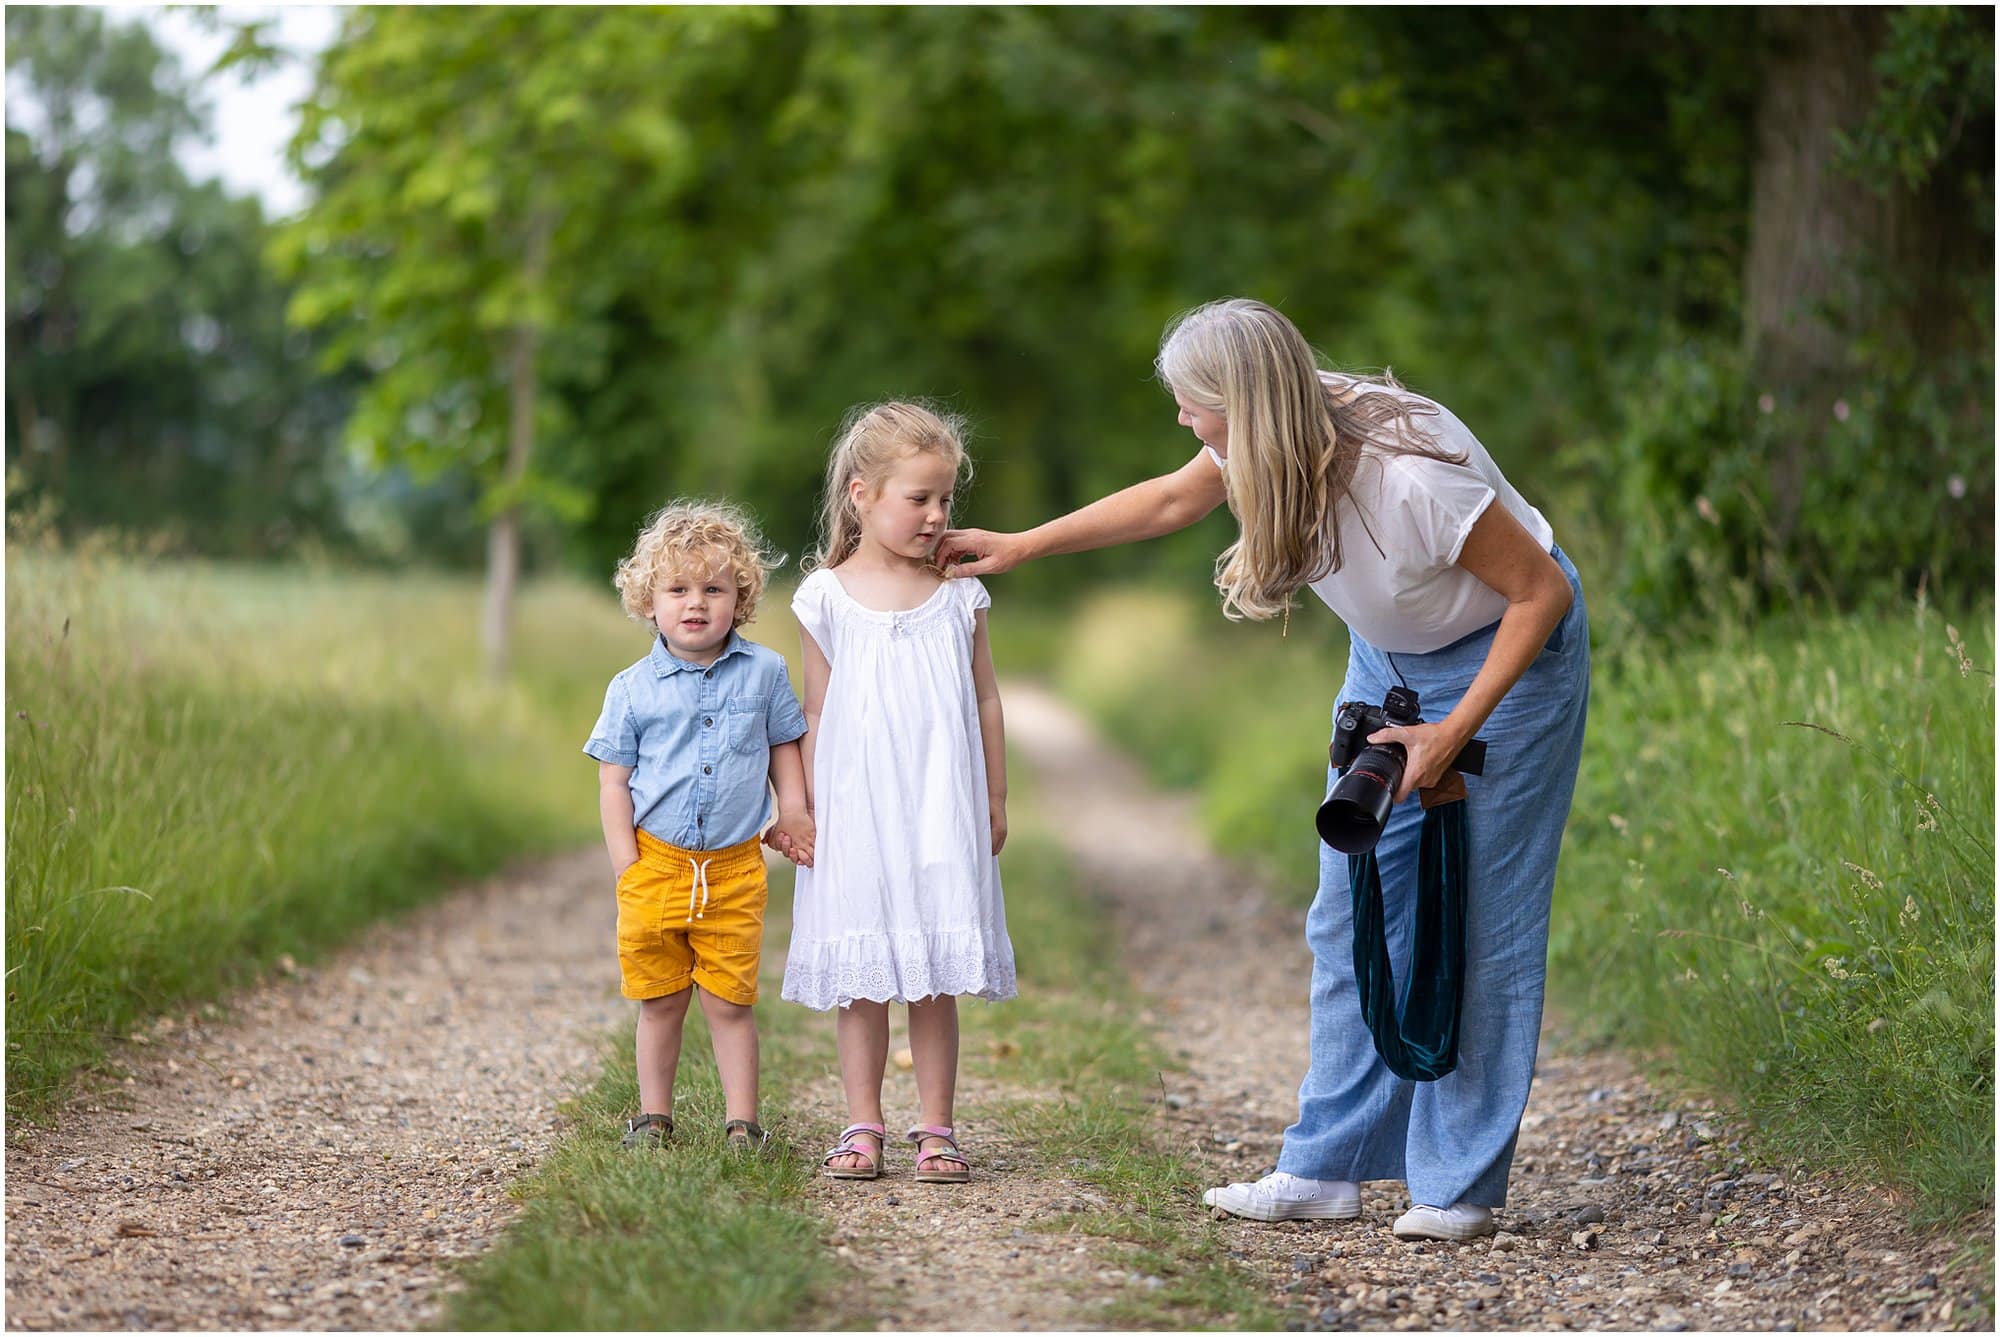 Behind the scenes photo of Alison McKenny photographing a family shoot on a country lane